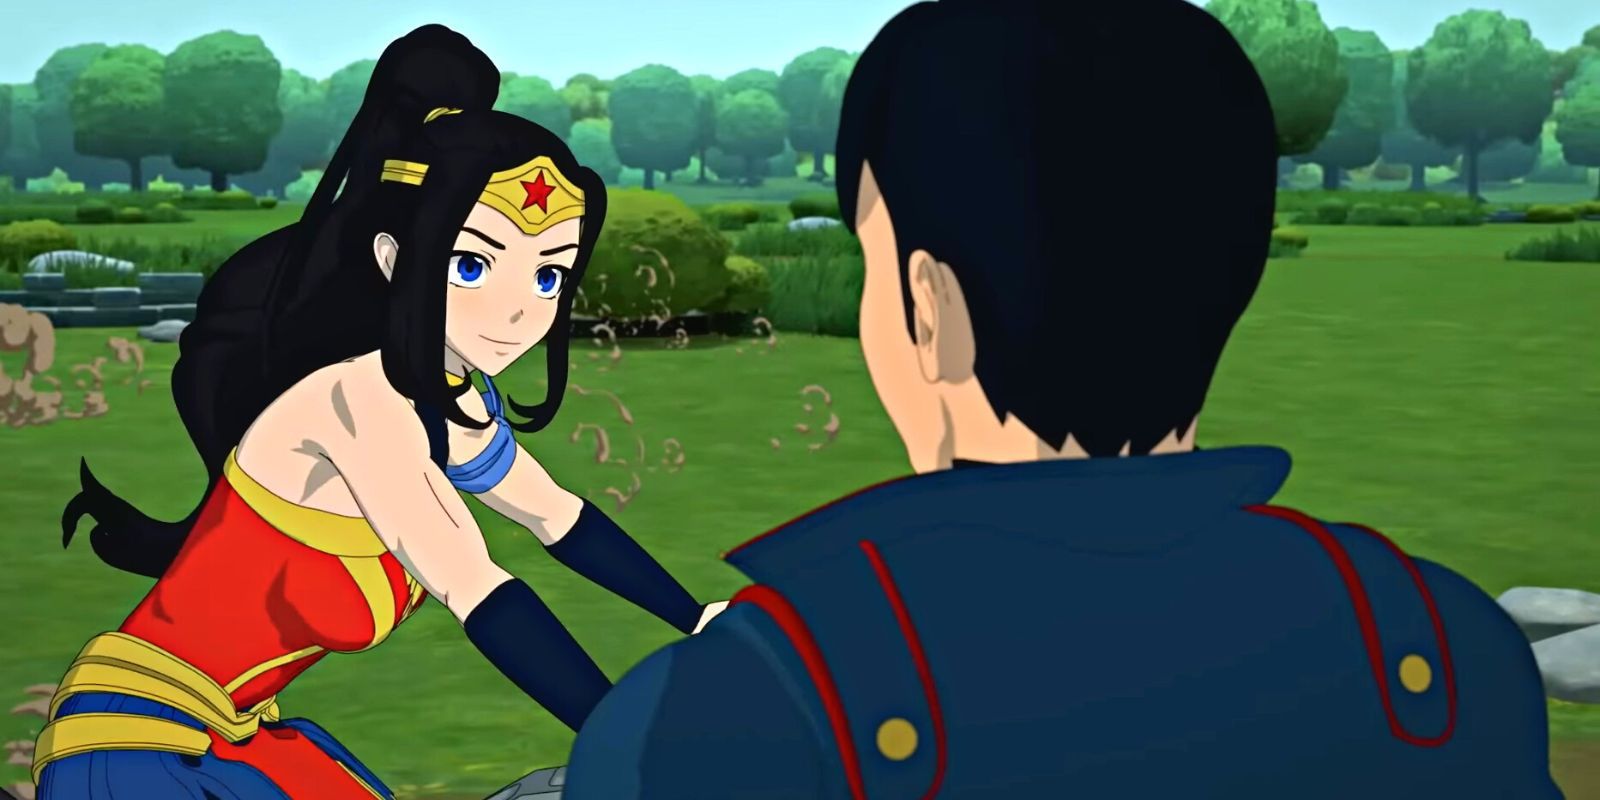 An anime version of Wonder Woman smiling at Superman while riding a bike in a wide open field